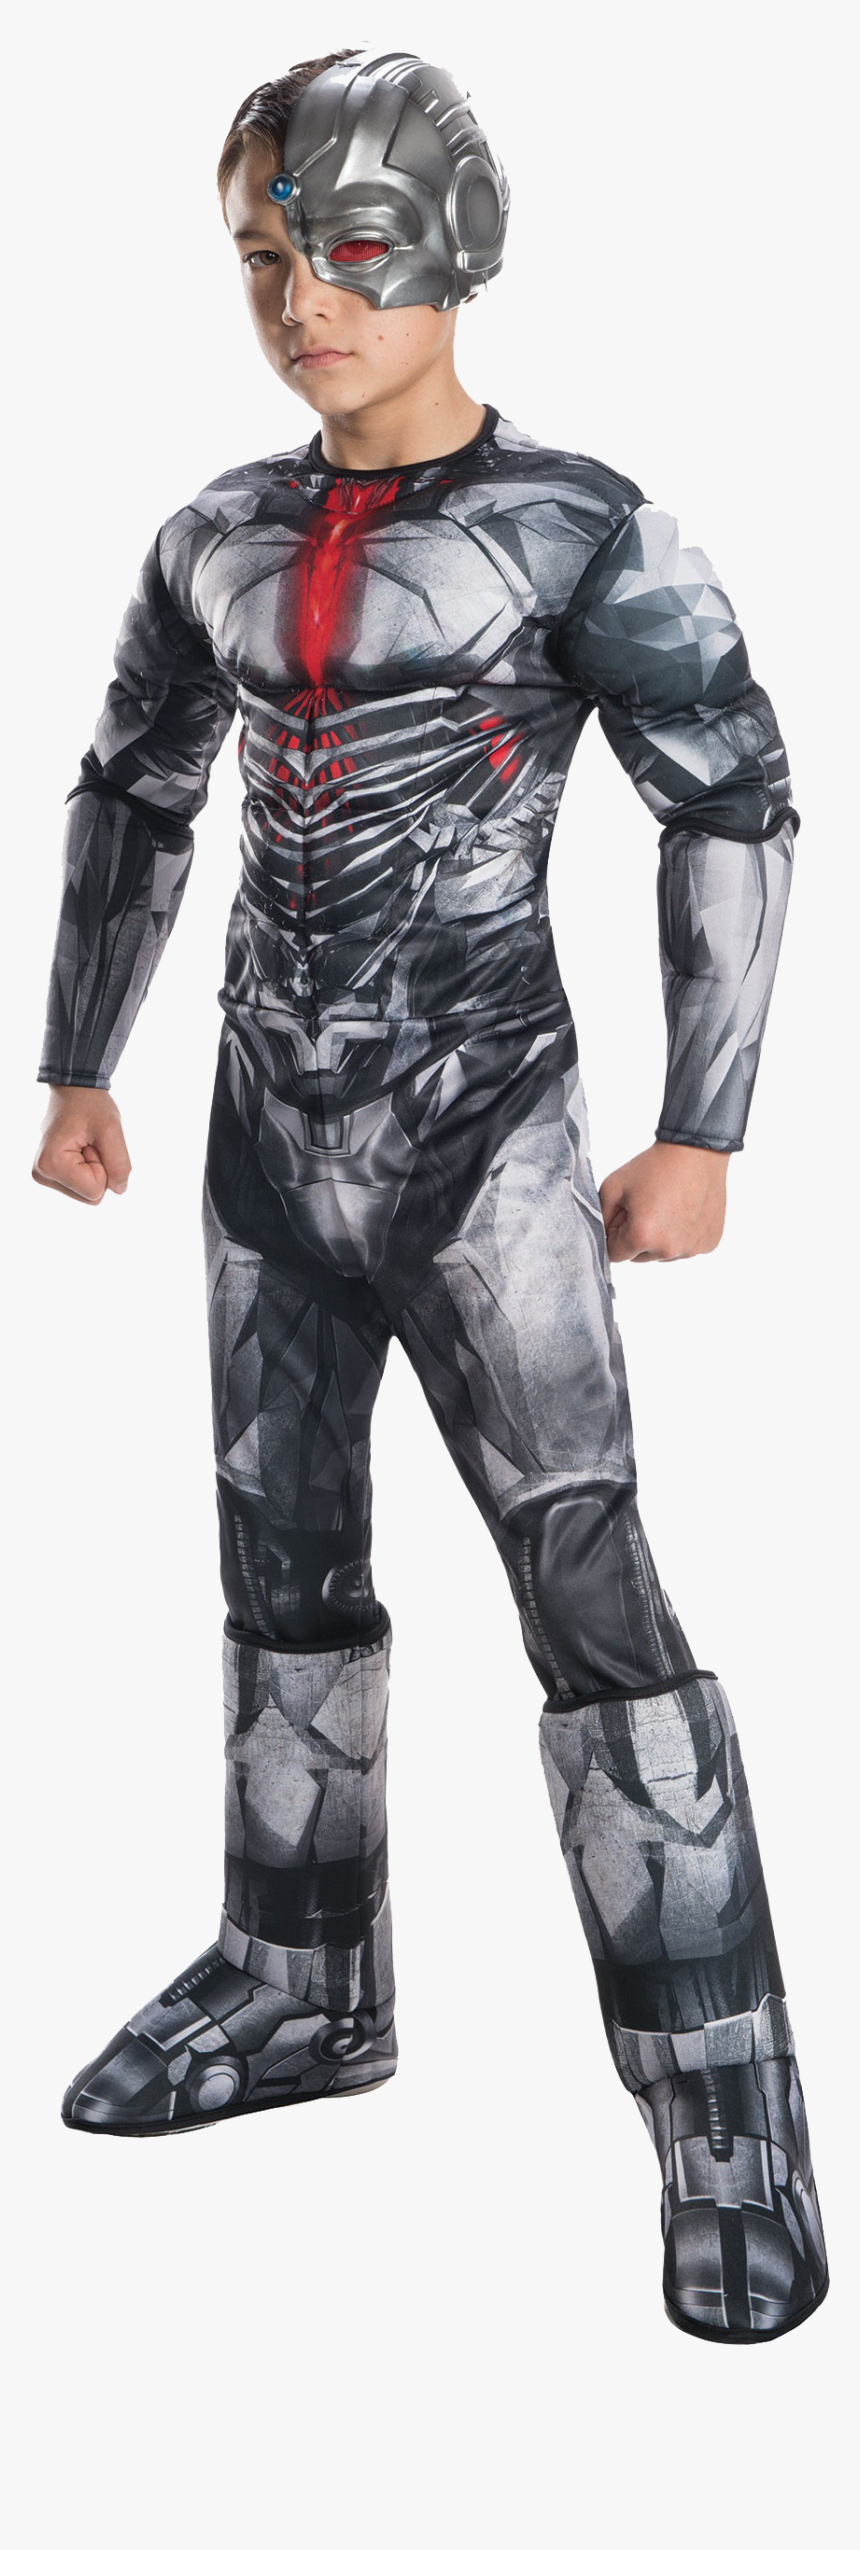 Cyborg Png Pic, Transparent Png, Free Download